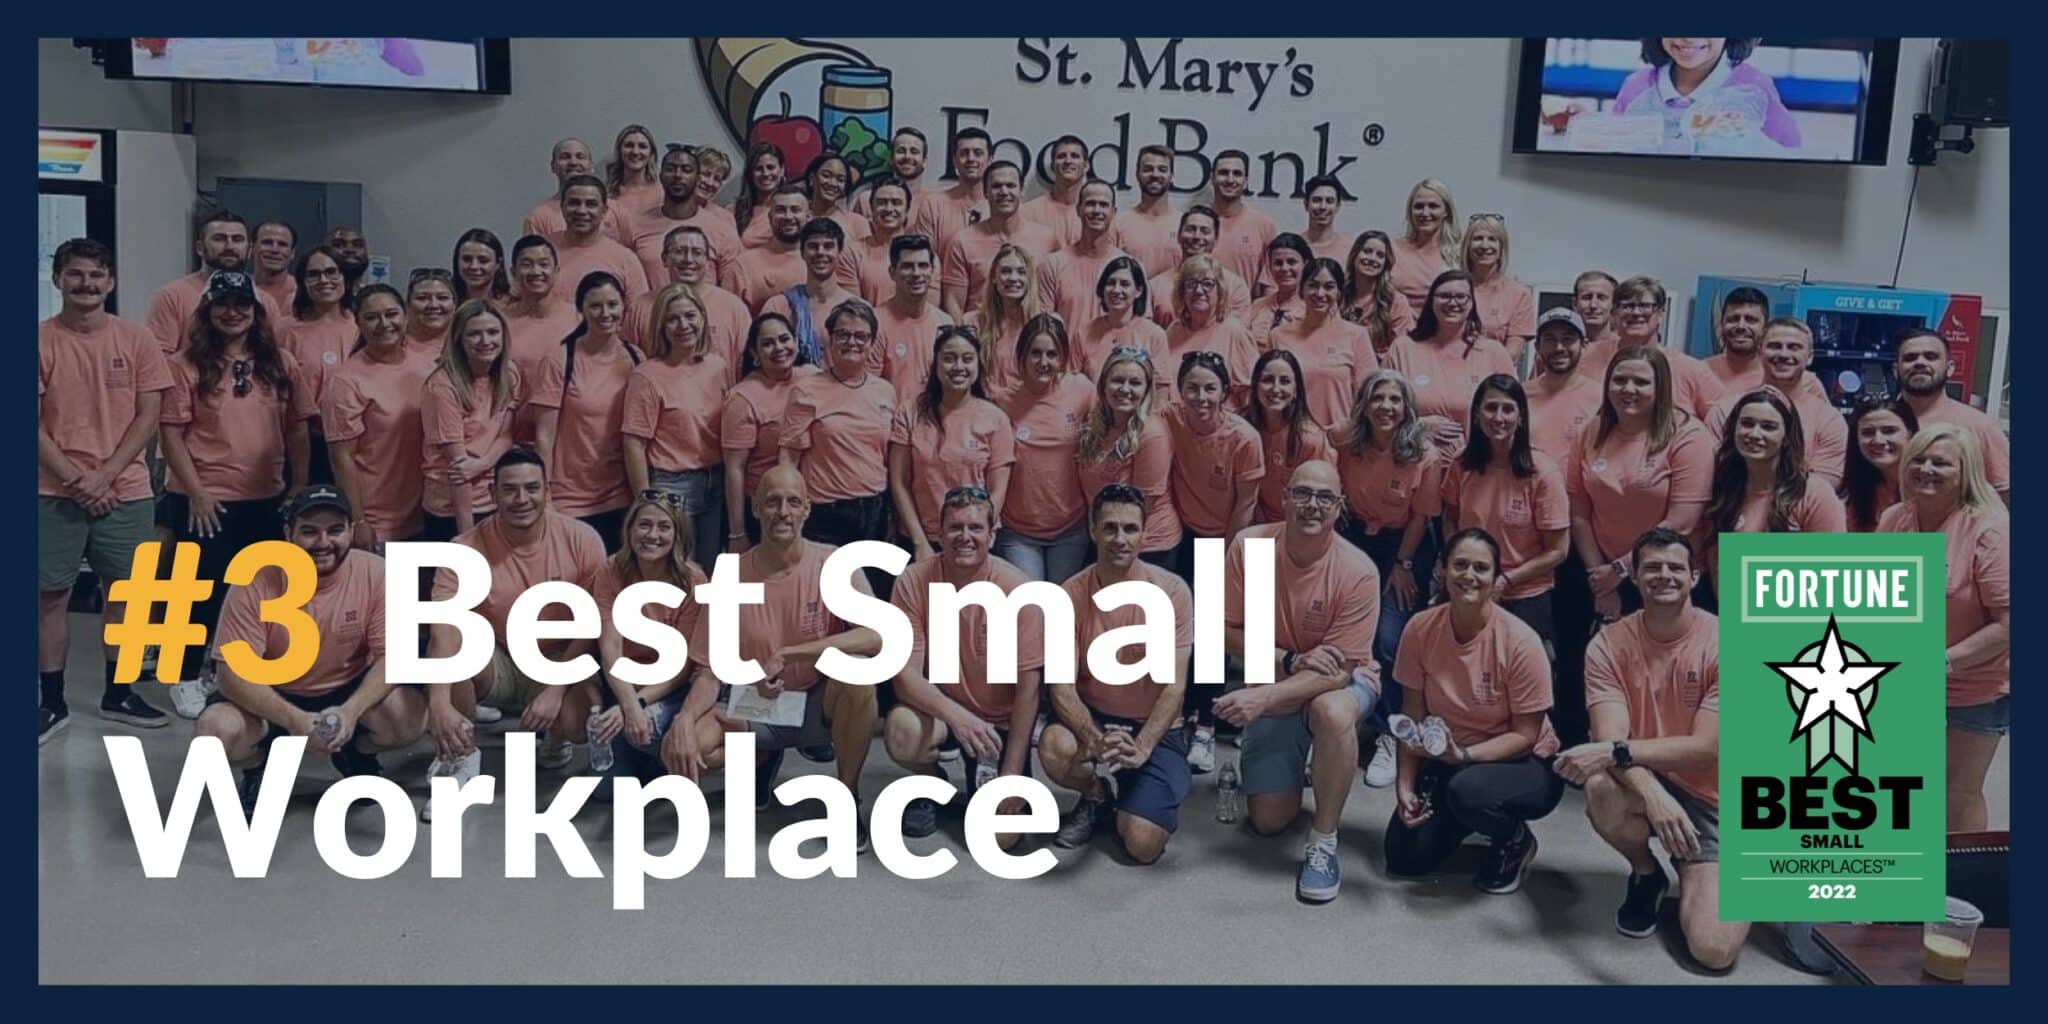 Mission Wealth Honored as #3 Best Small Workplaces by FORTUNE